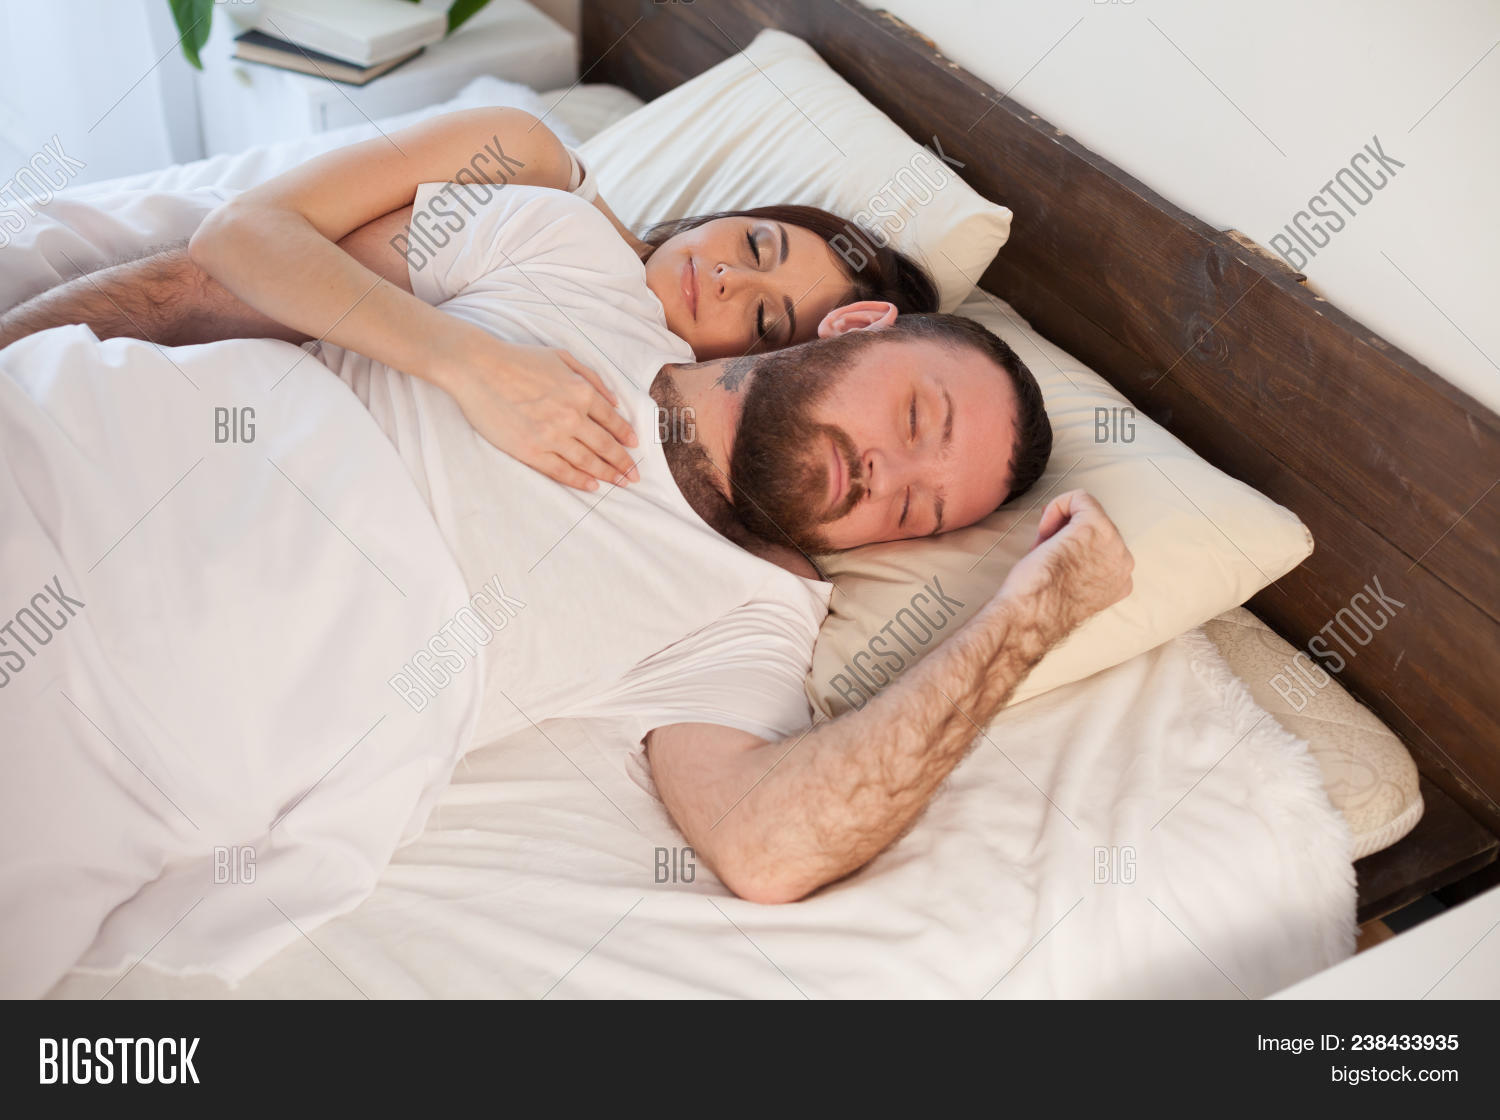 adam russell recommends Wife Asleep Pics